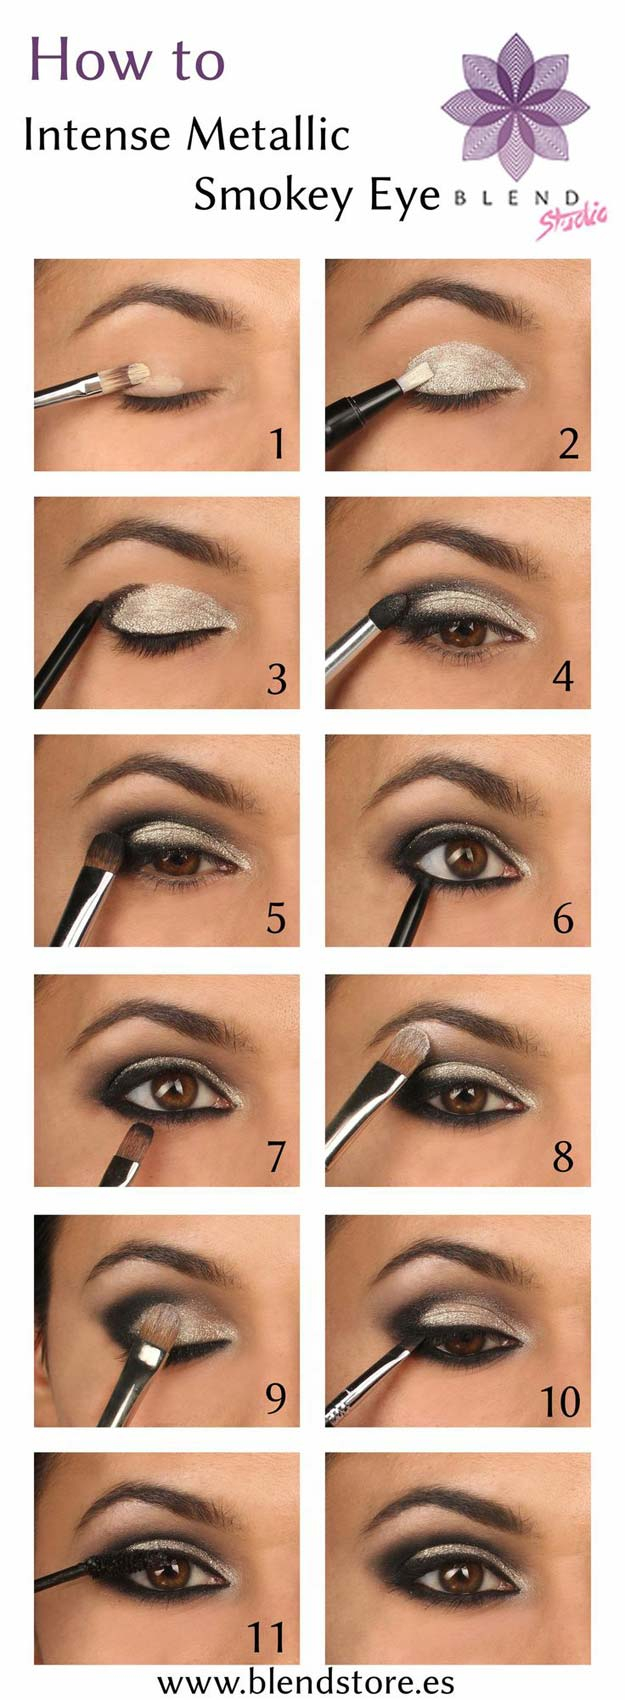 Makeup For Homecoming For Brown Eyes 38 Makeup Ideas For Prom The Goddess